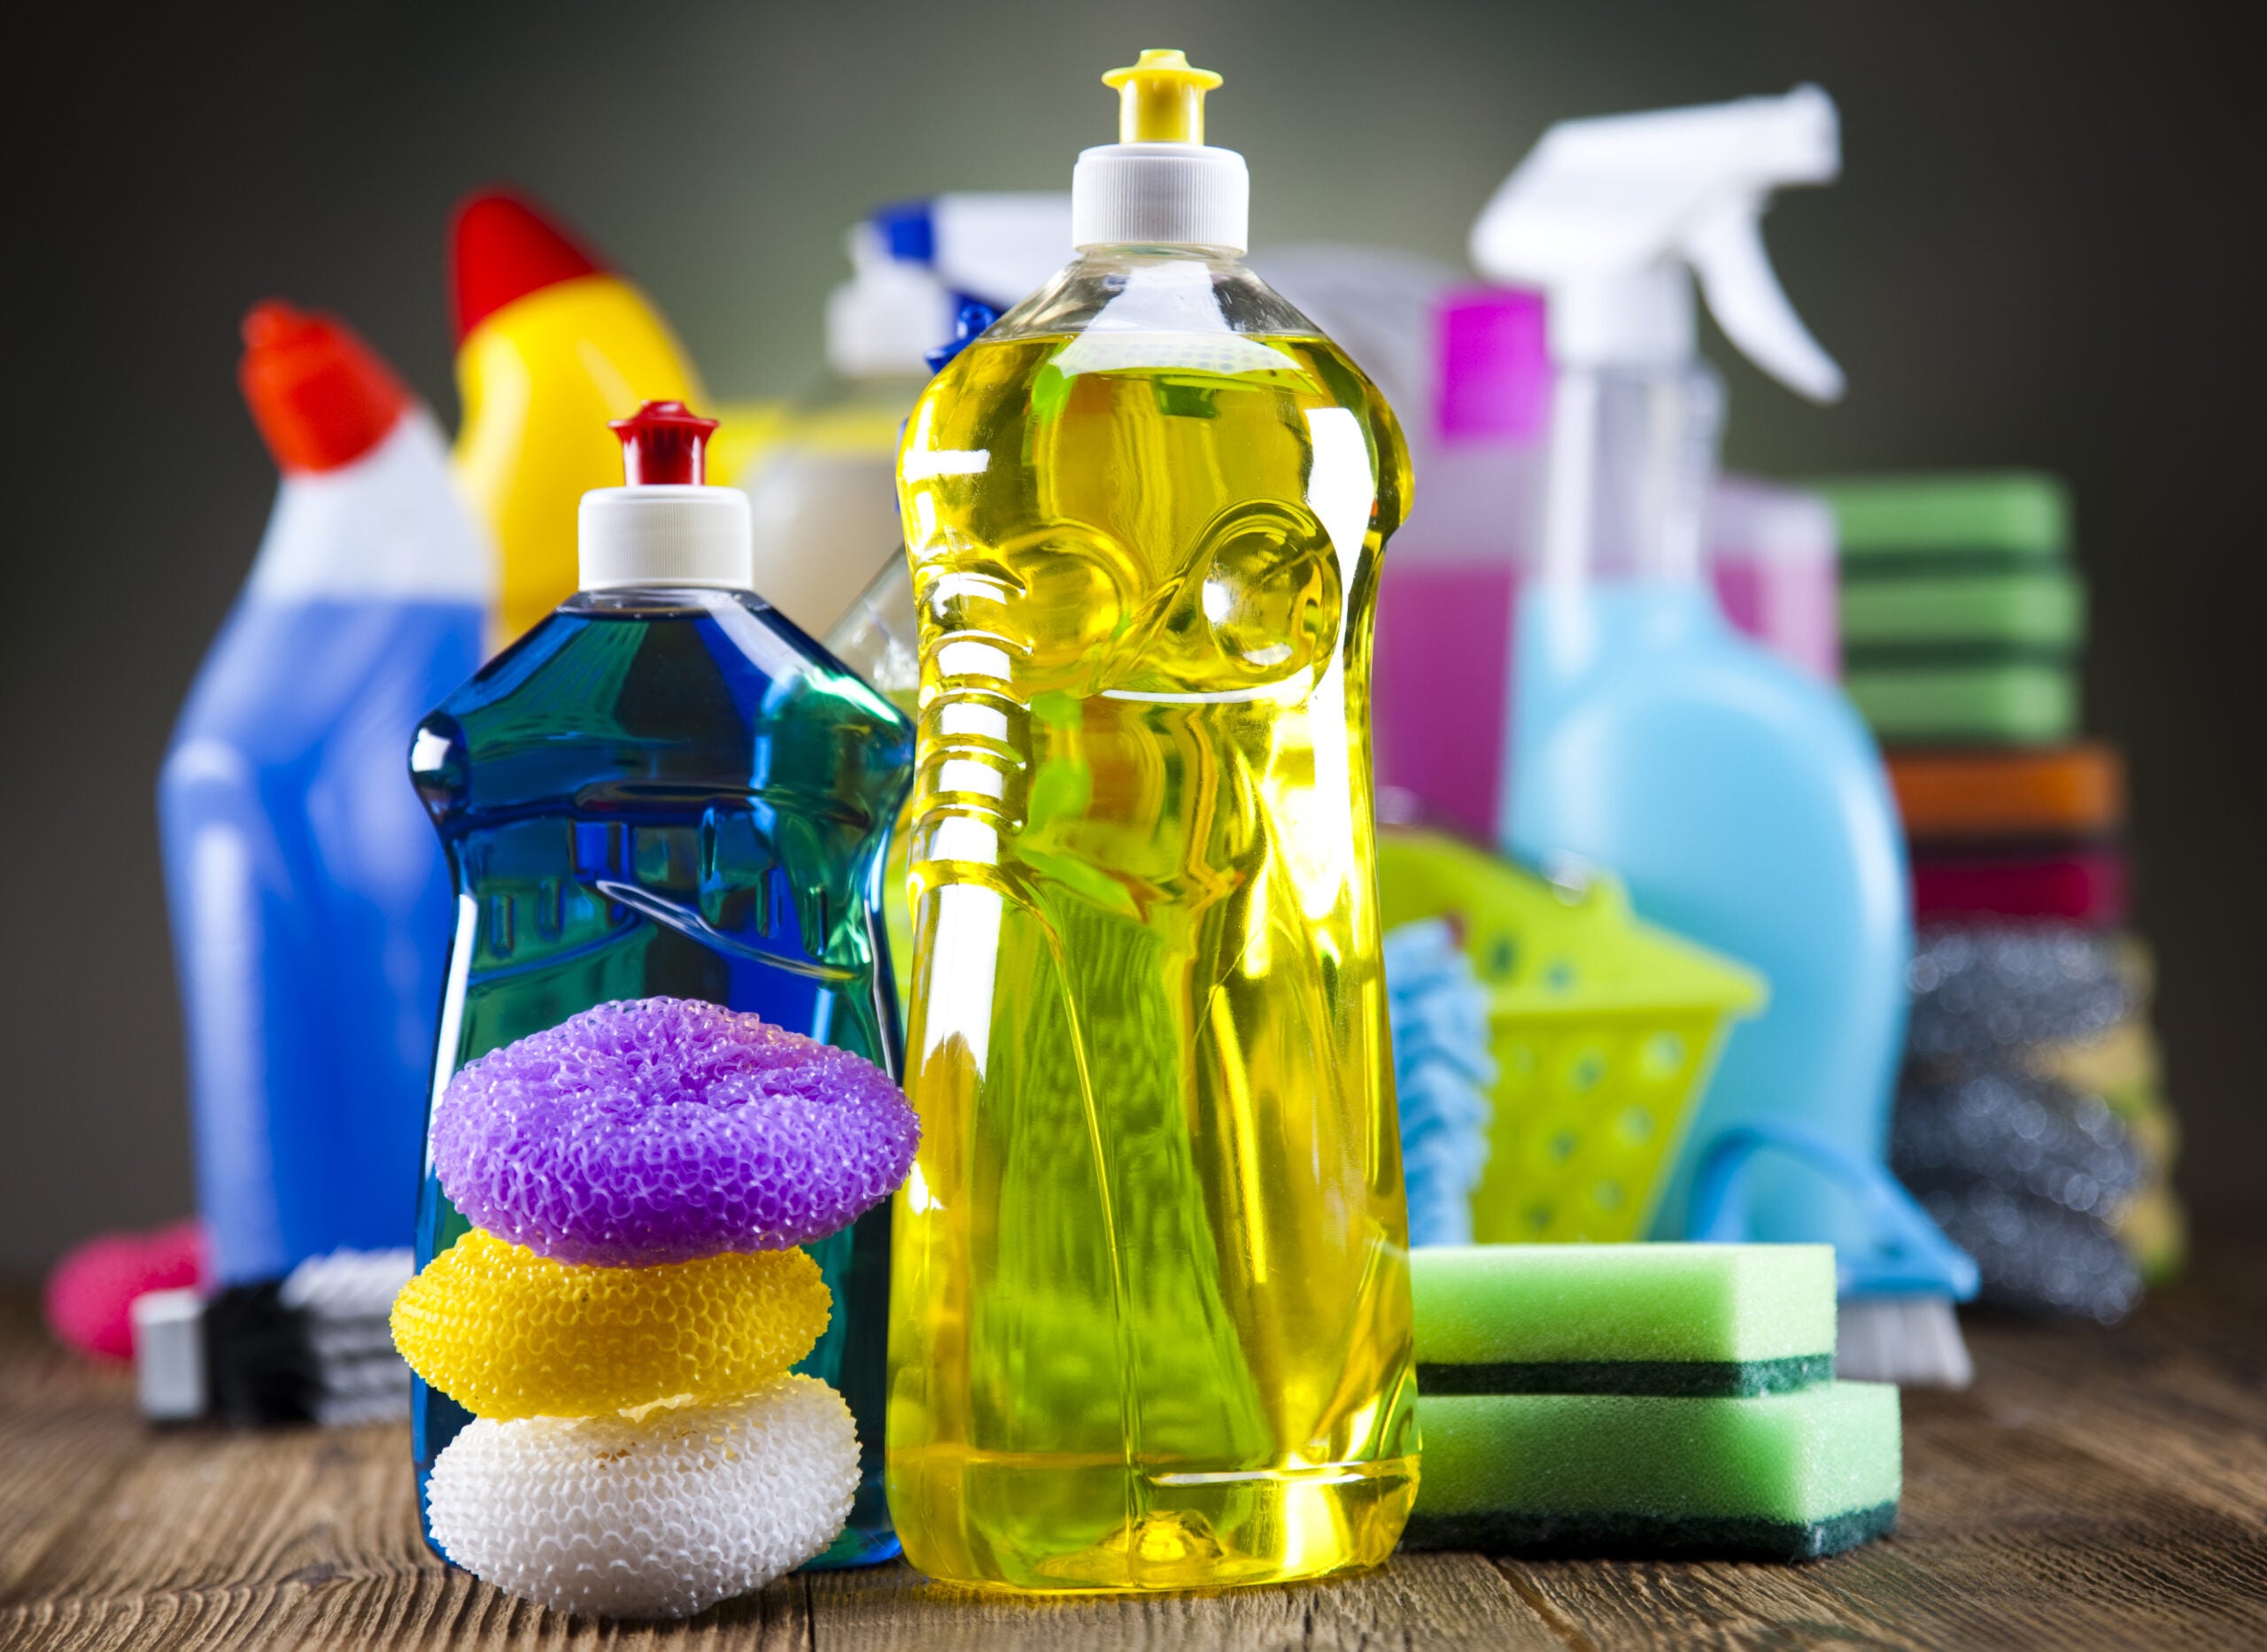 A toxic chemical called galaxolide that’s commonly included in household cleaning products has been found to accumulate in our bodies and ecosystems.
(Sebastian Duda/Shutterstock)